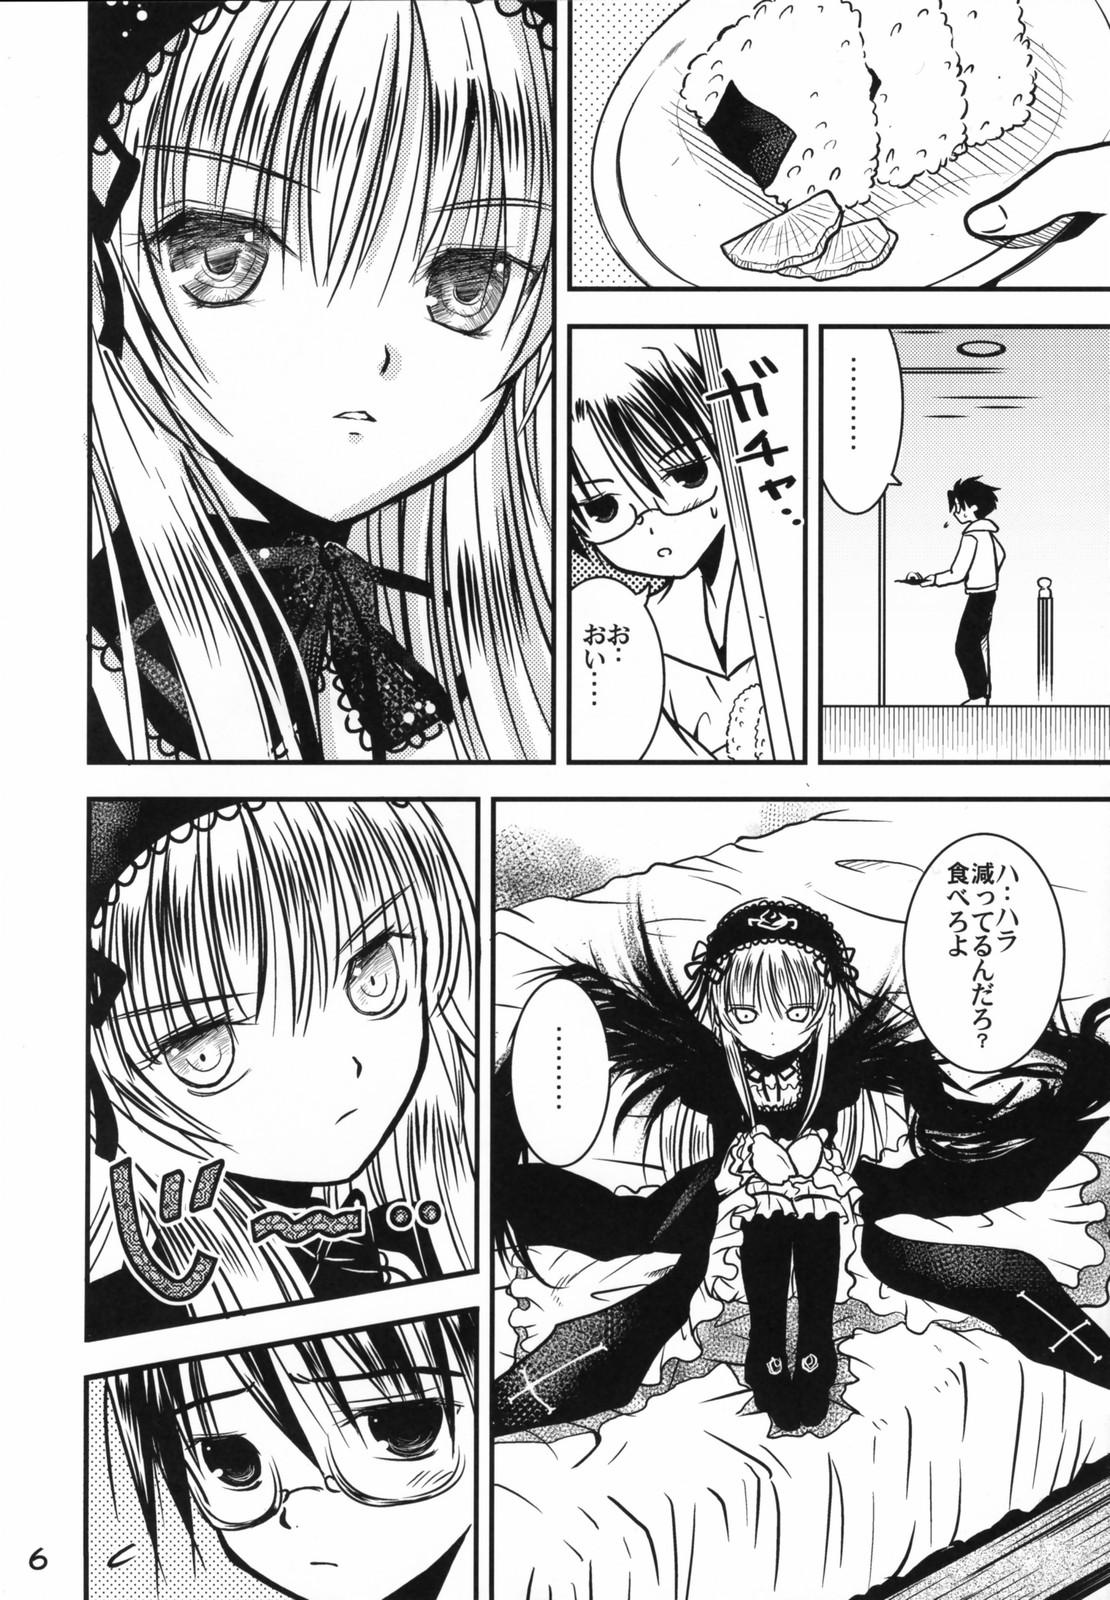 Three Some A caprice - Rozen maiden Webcamchat - Page 5